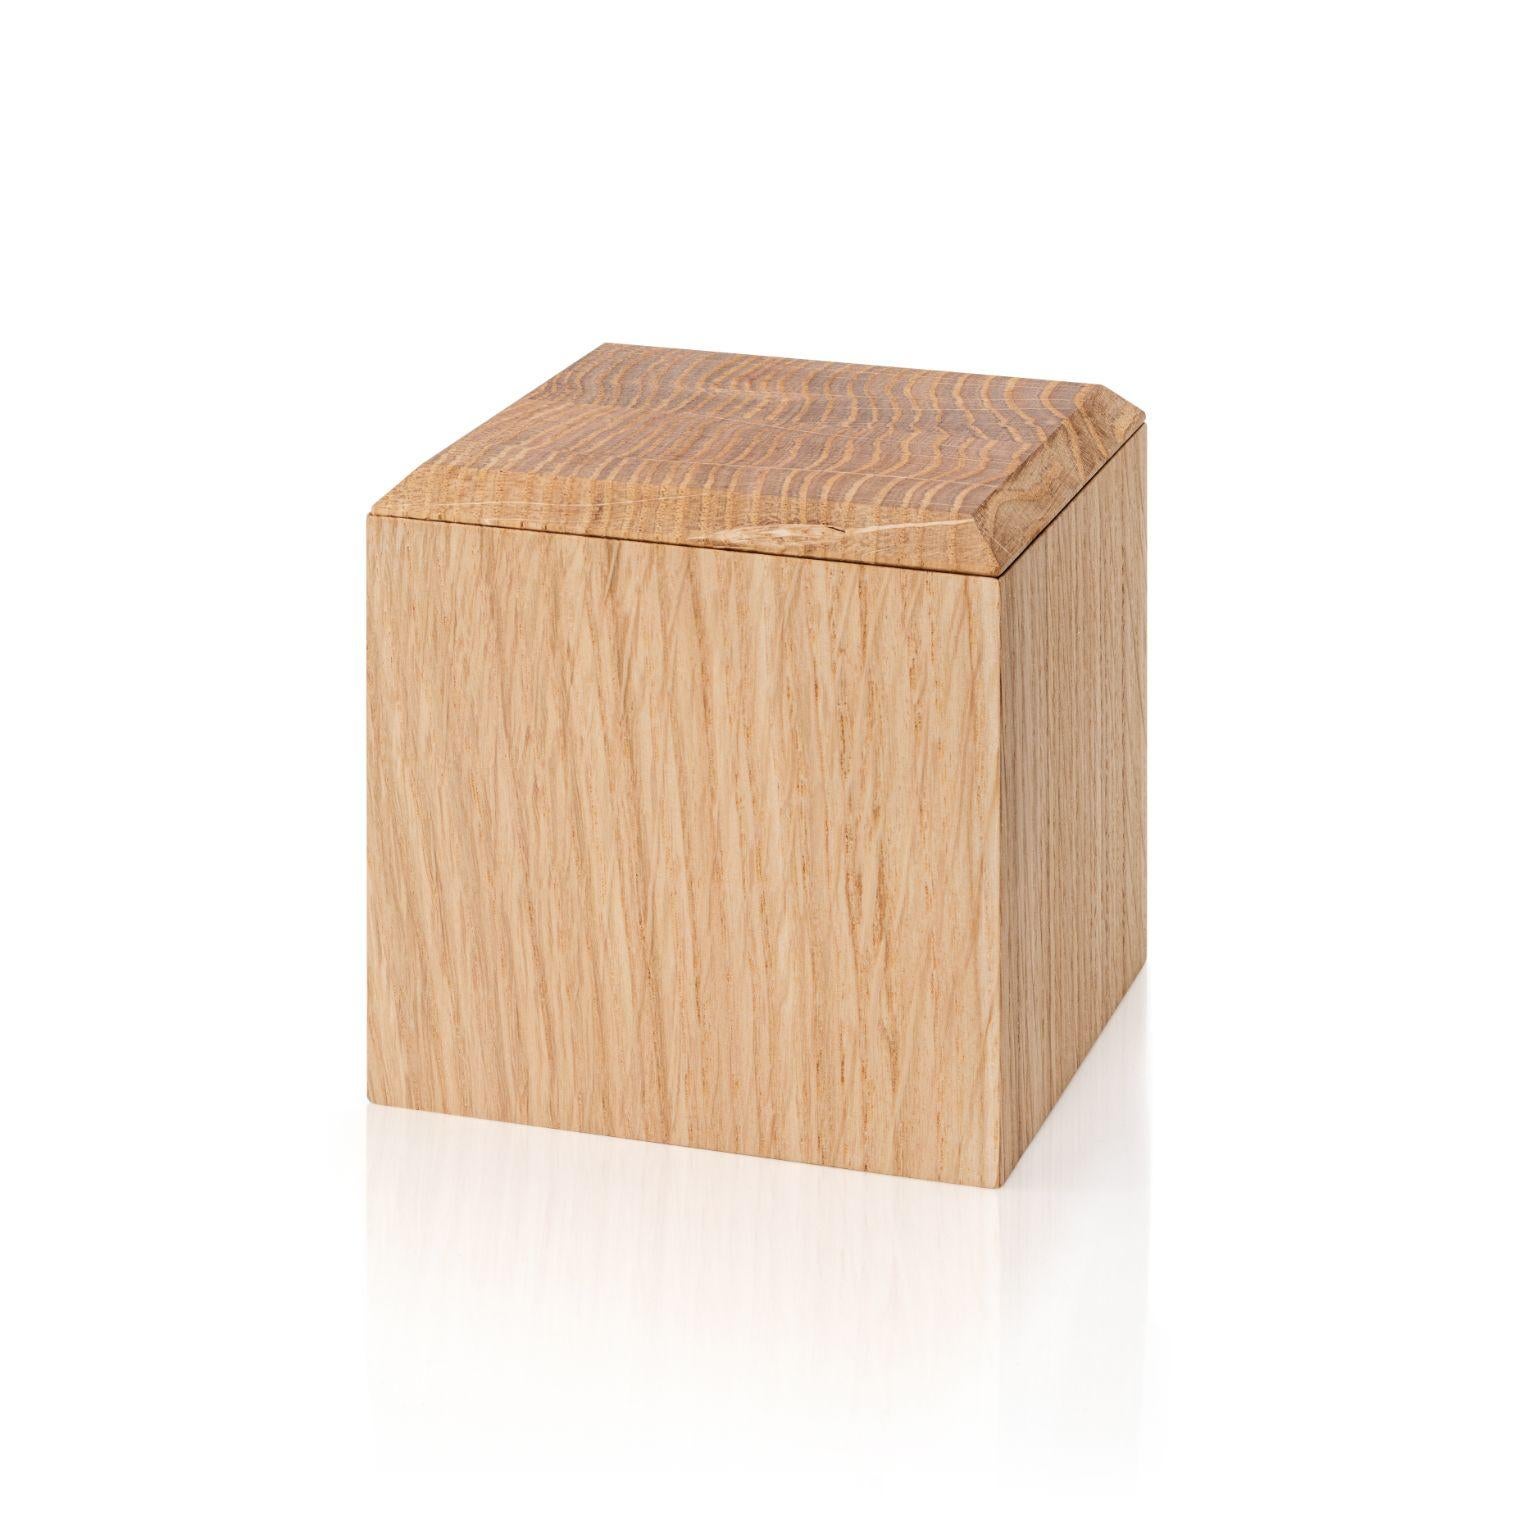 Medium Pino boxes by Antrei Hartikainen
Materials: Oak, natural oil wax
Dimensions: D 9, W 9, H 5 / 9,5 / 14cm

A set of three vertical and two horizontal stacking boxes constructed of vividly grained woods. The pino boxes may be arranged in various